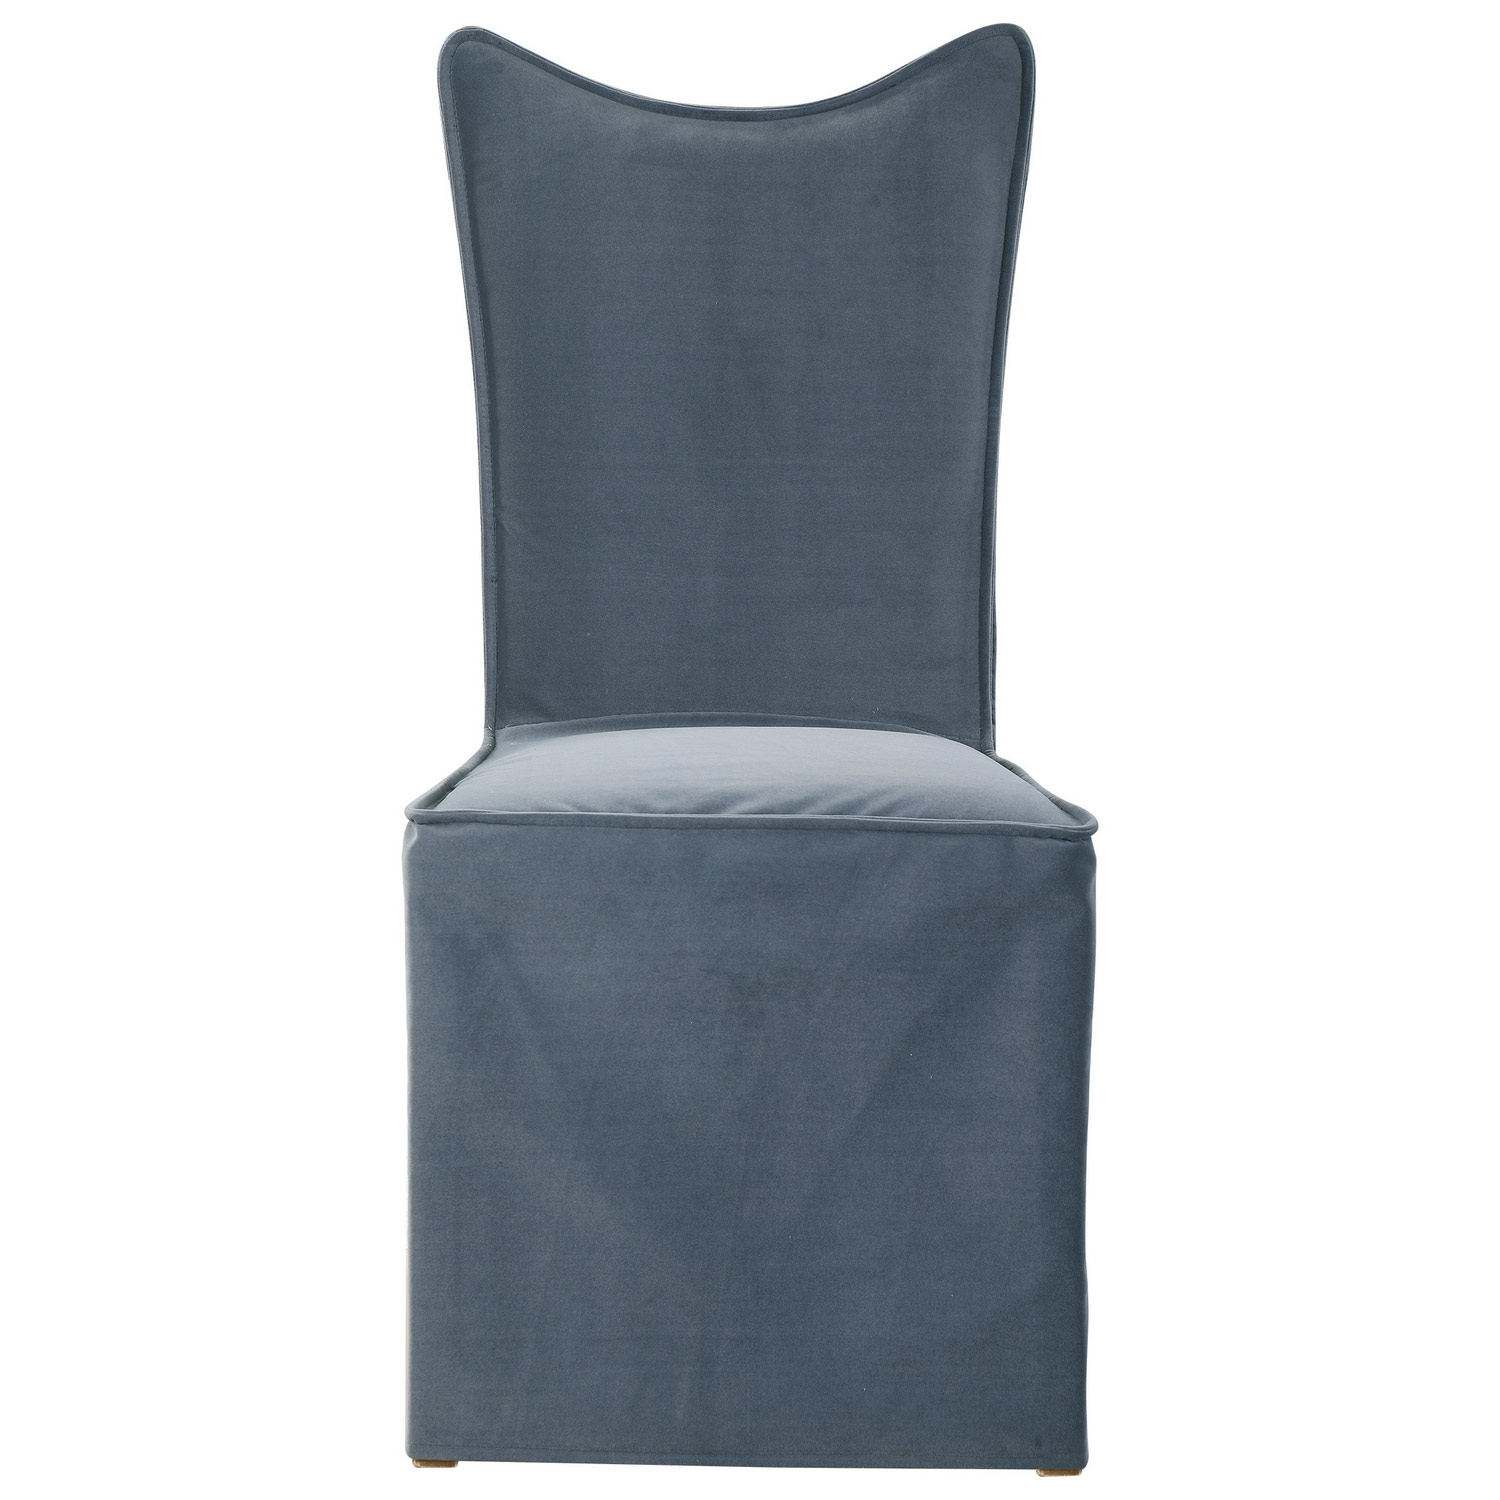 Uttermost Delroy Armless Chair - Set of 2 - Gray